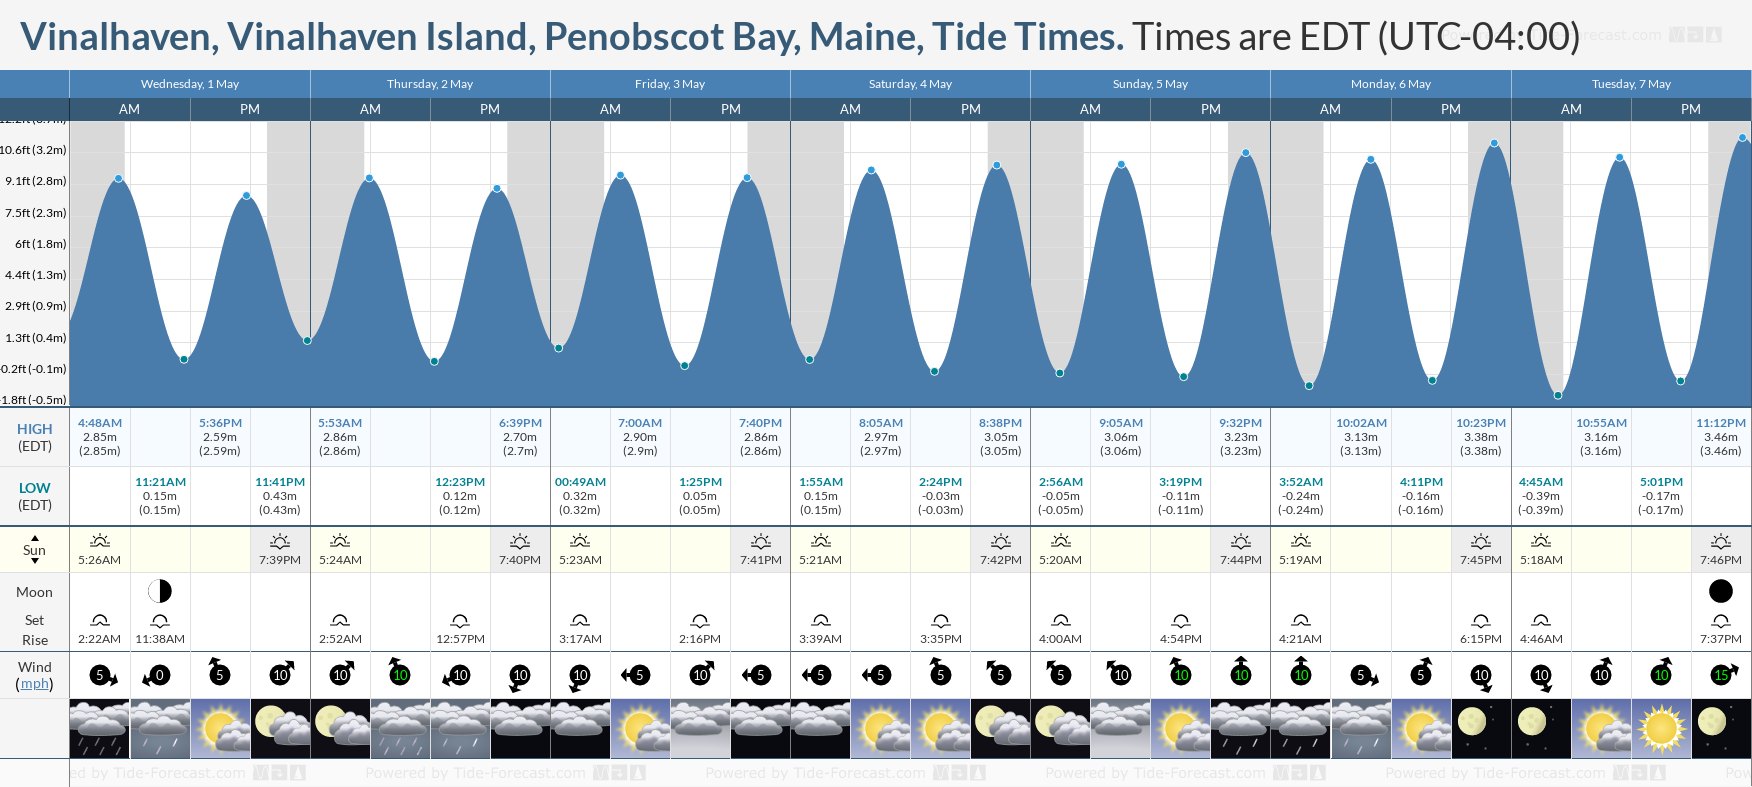 Vinalhaven, Vinalhaven Island, Penobscot Bay, Maine Tide Chart including high and low tide tide times for the next 7 days